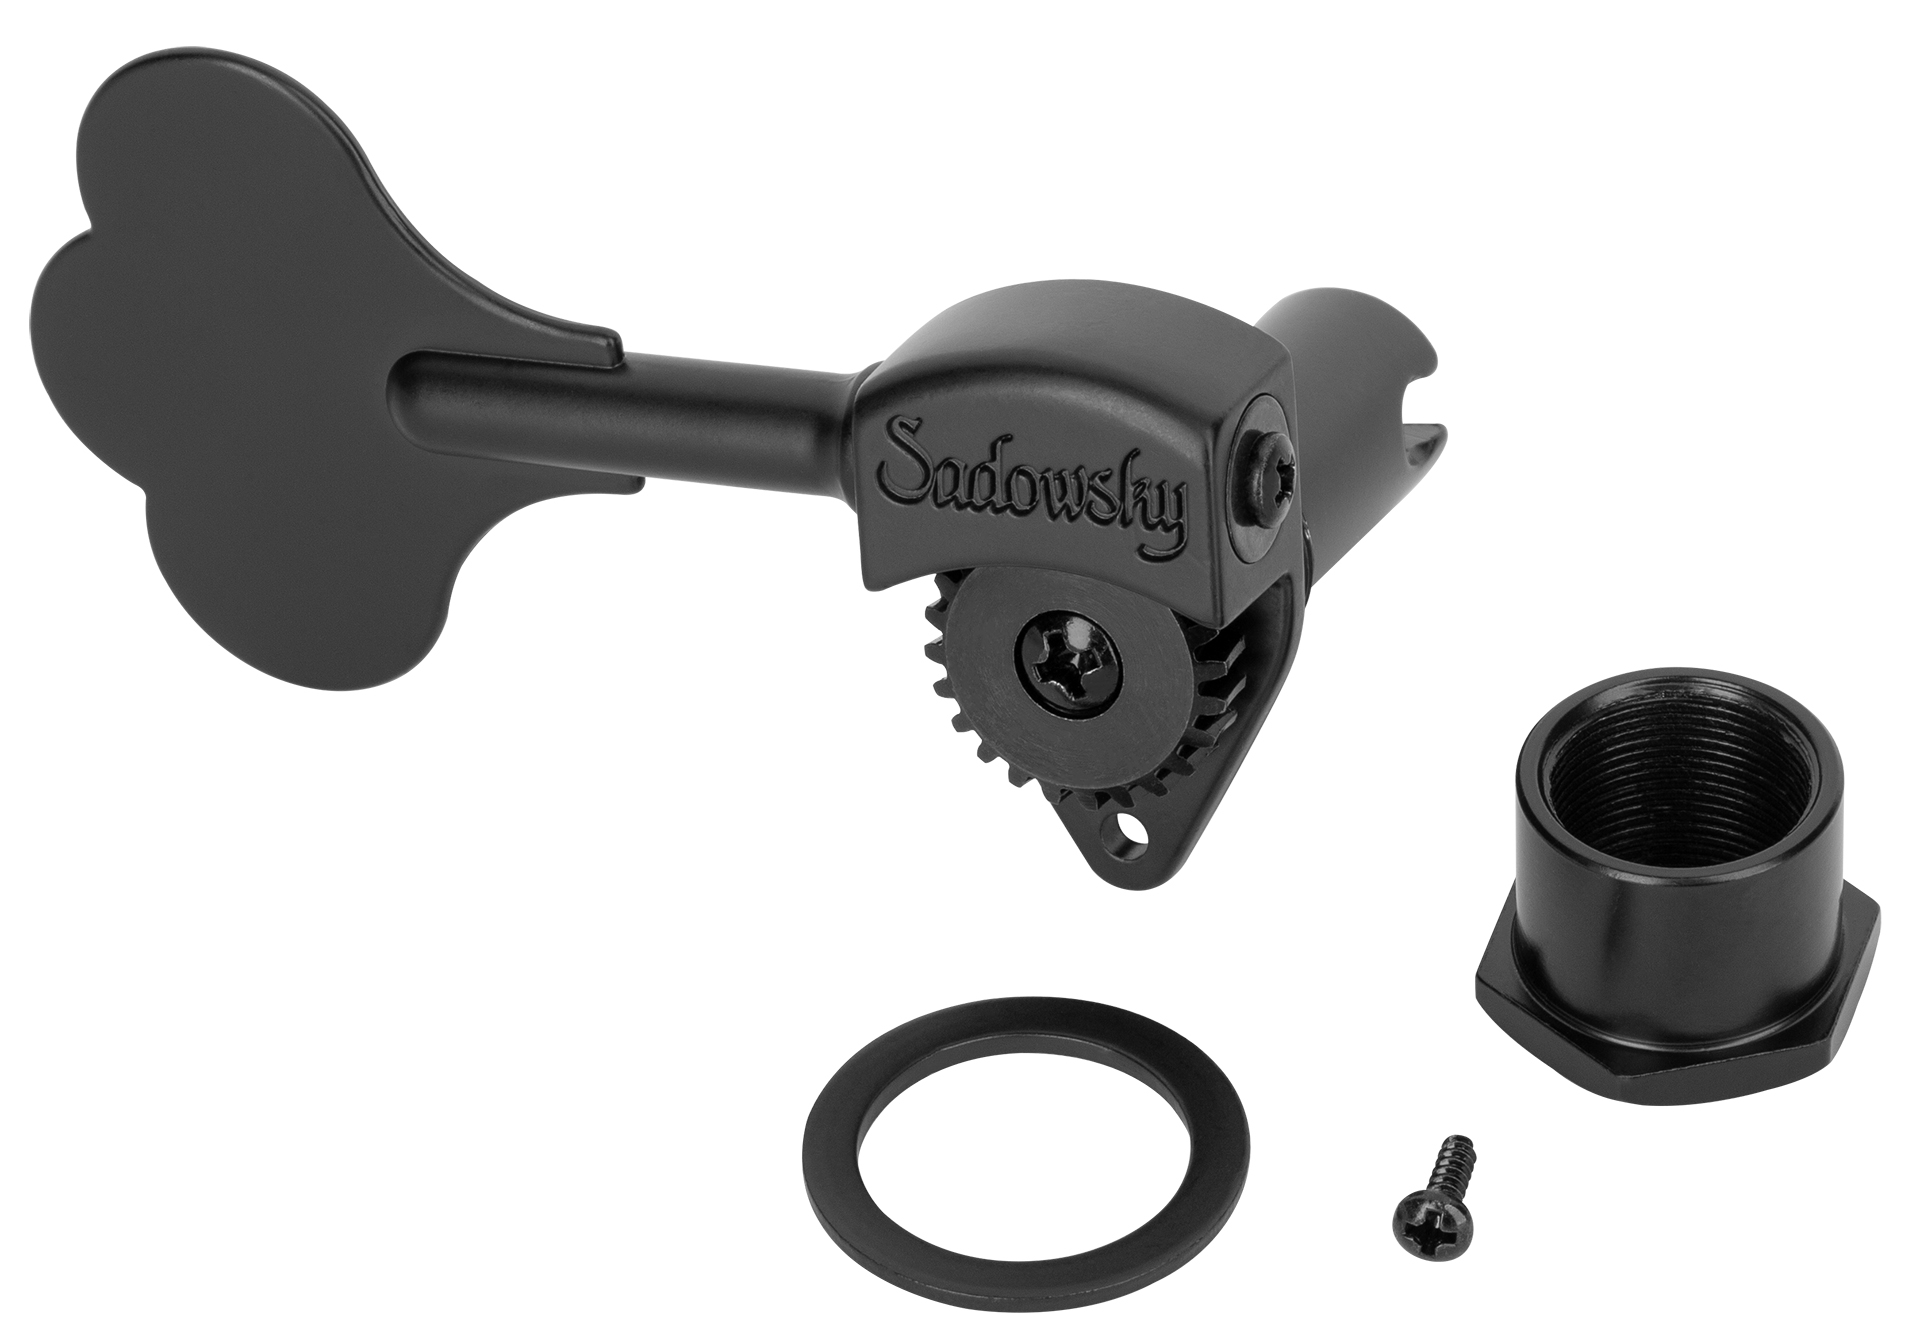 Sadowsky Parts - Light Machinehead with Open Gear - Black - Right (Treble) Side